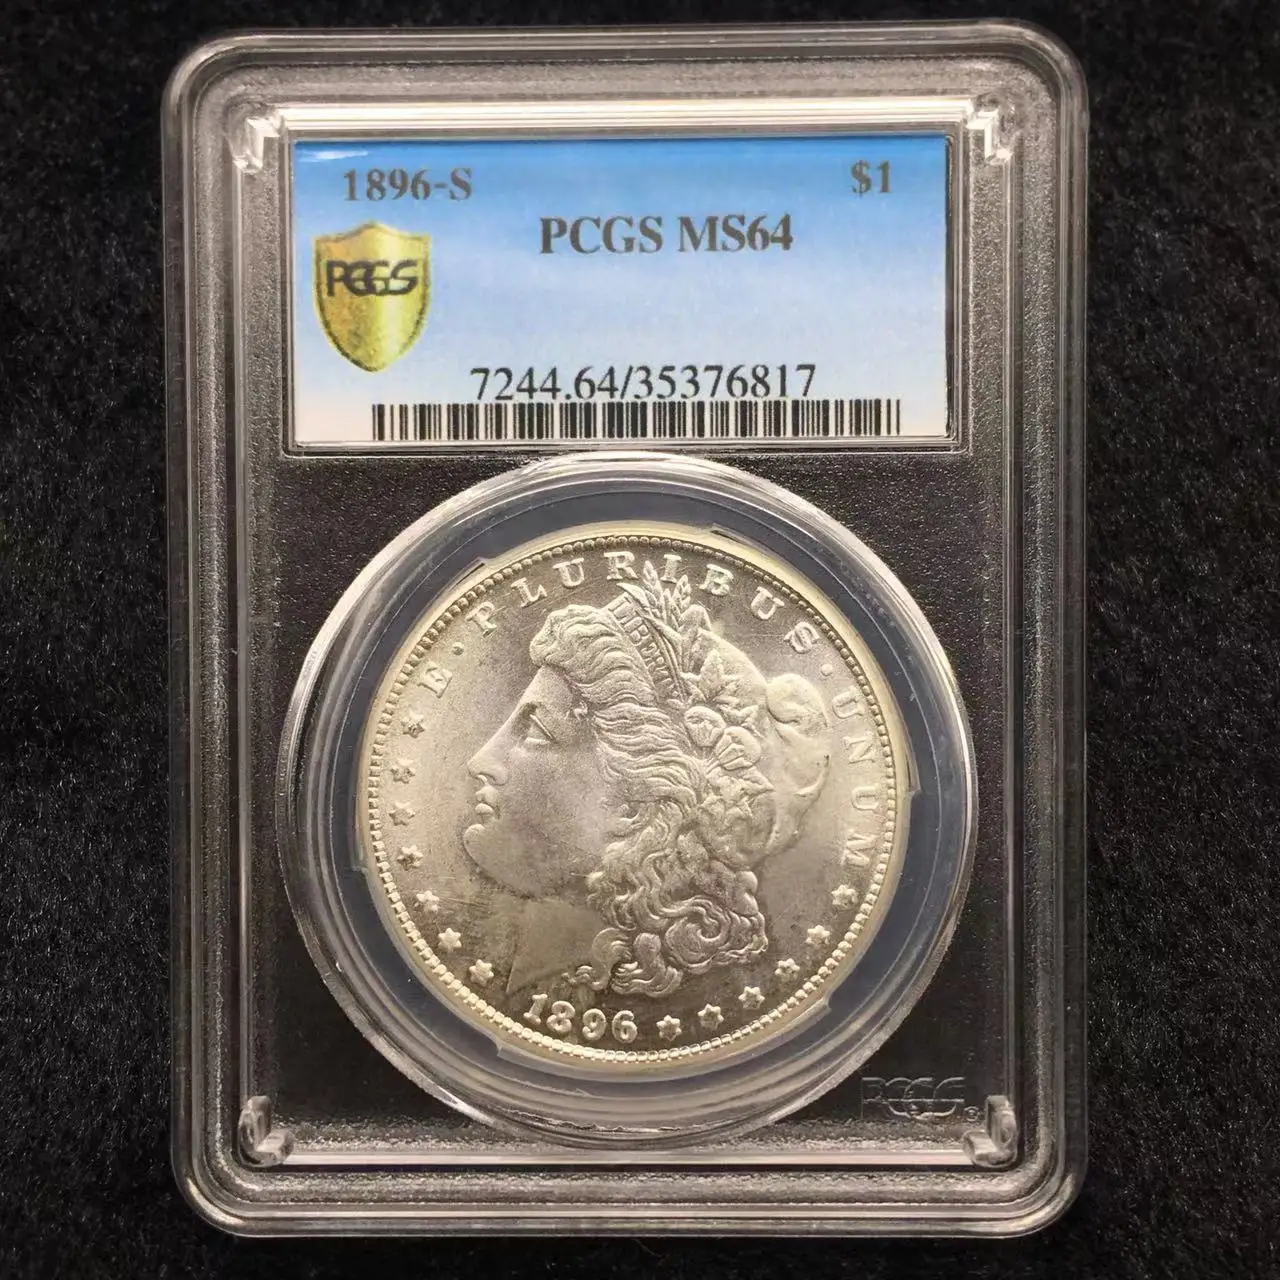 

1896-S USA Morgan Dollar Coin Rating Silver Coins Sealed in Box,High Quality Collectibles Graded Coins Holder PCGS MS64